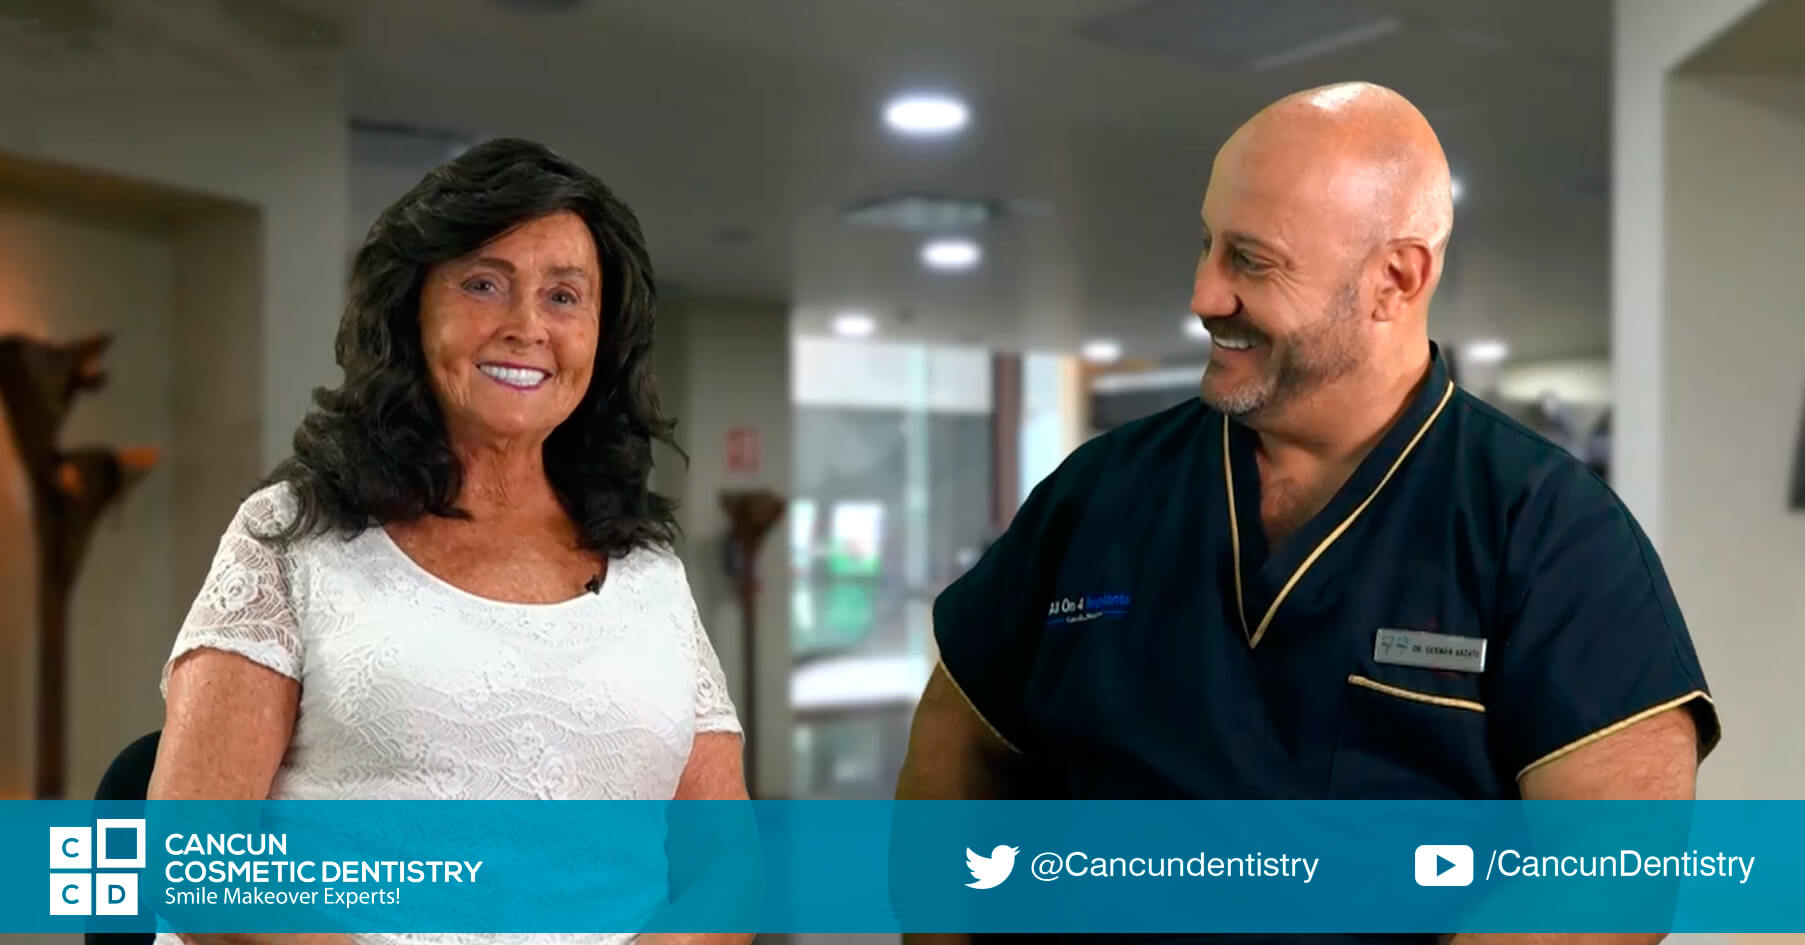 She feels better about herself - Cancun Cosmetic Dentistry Review